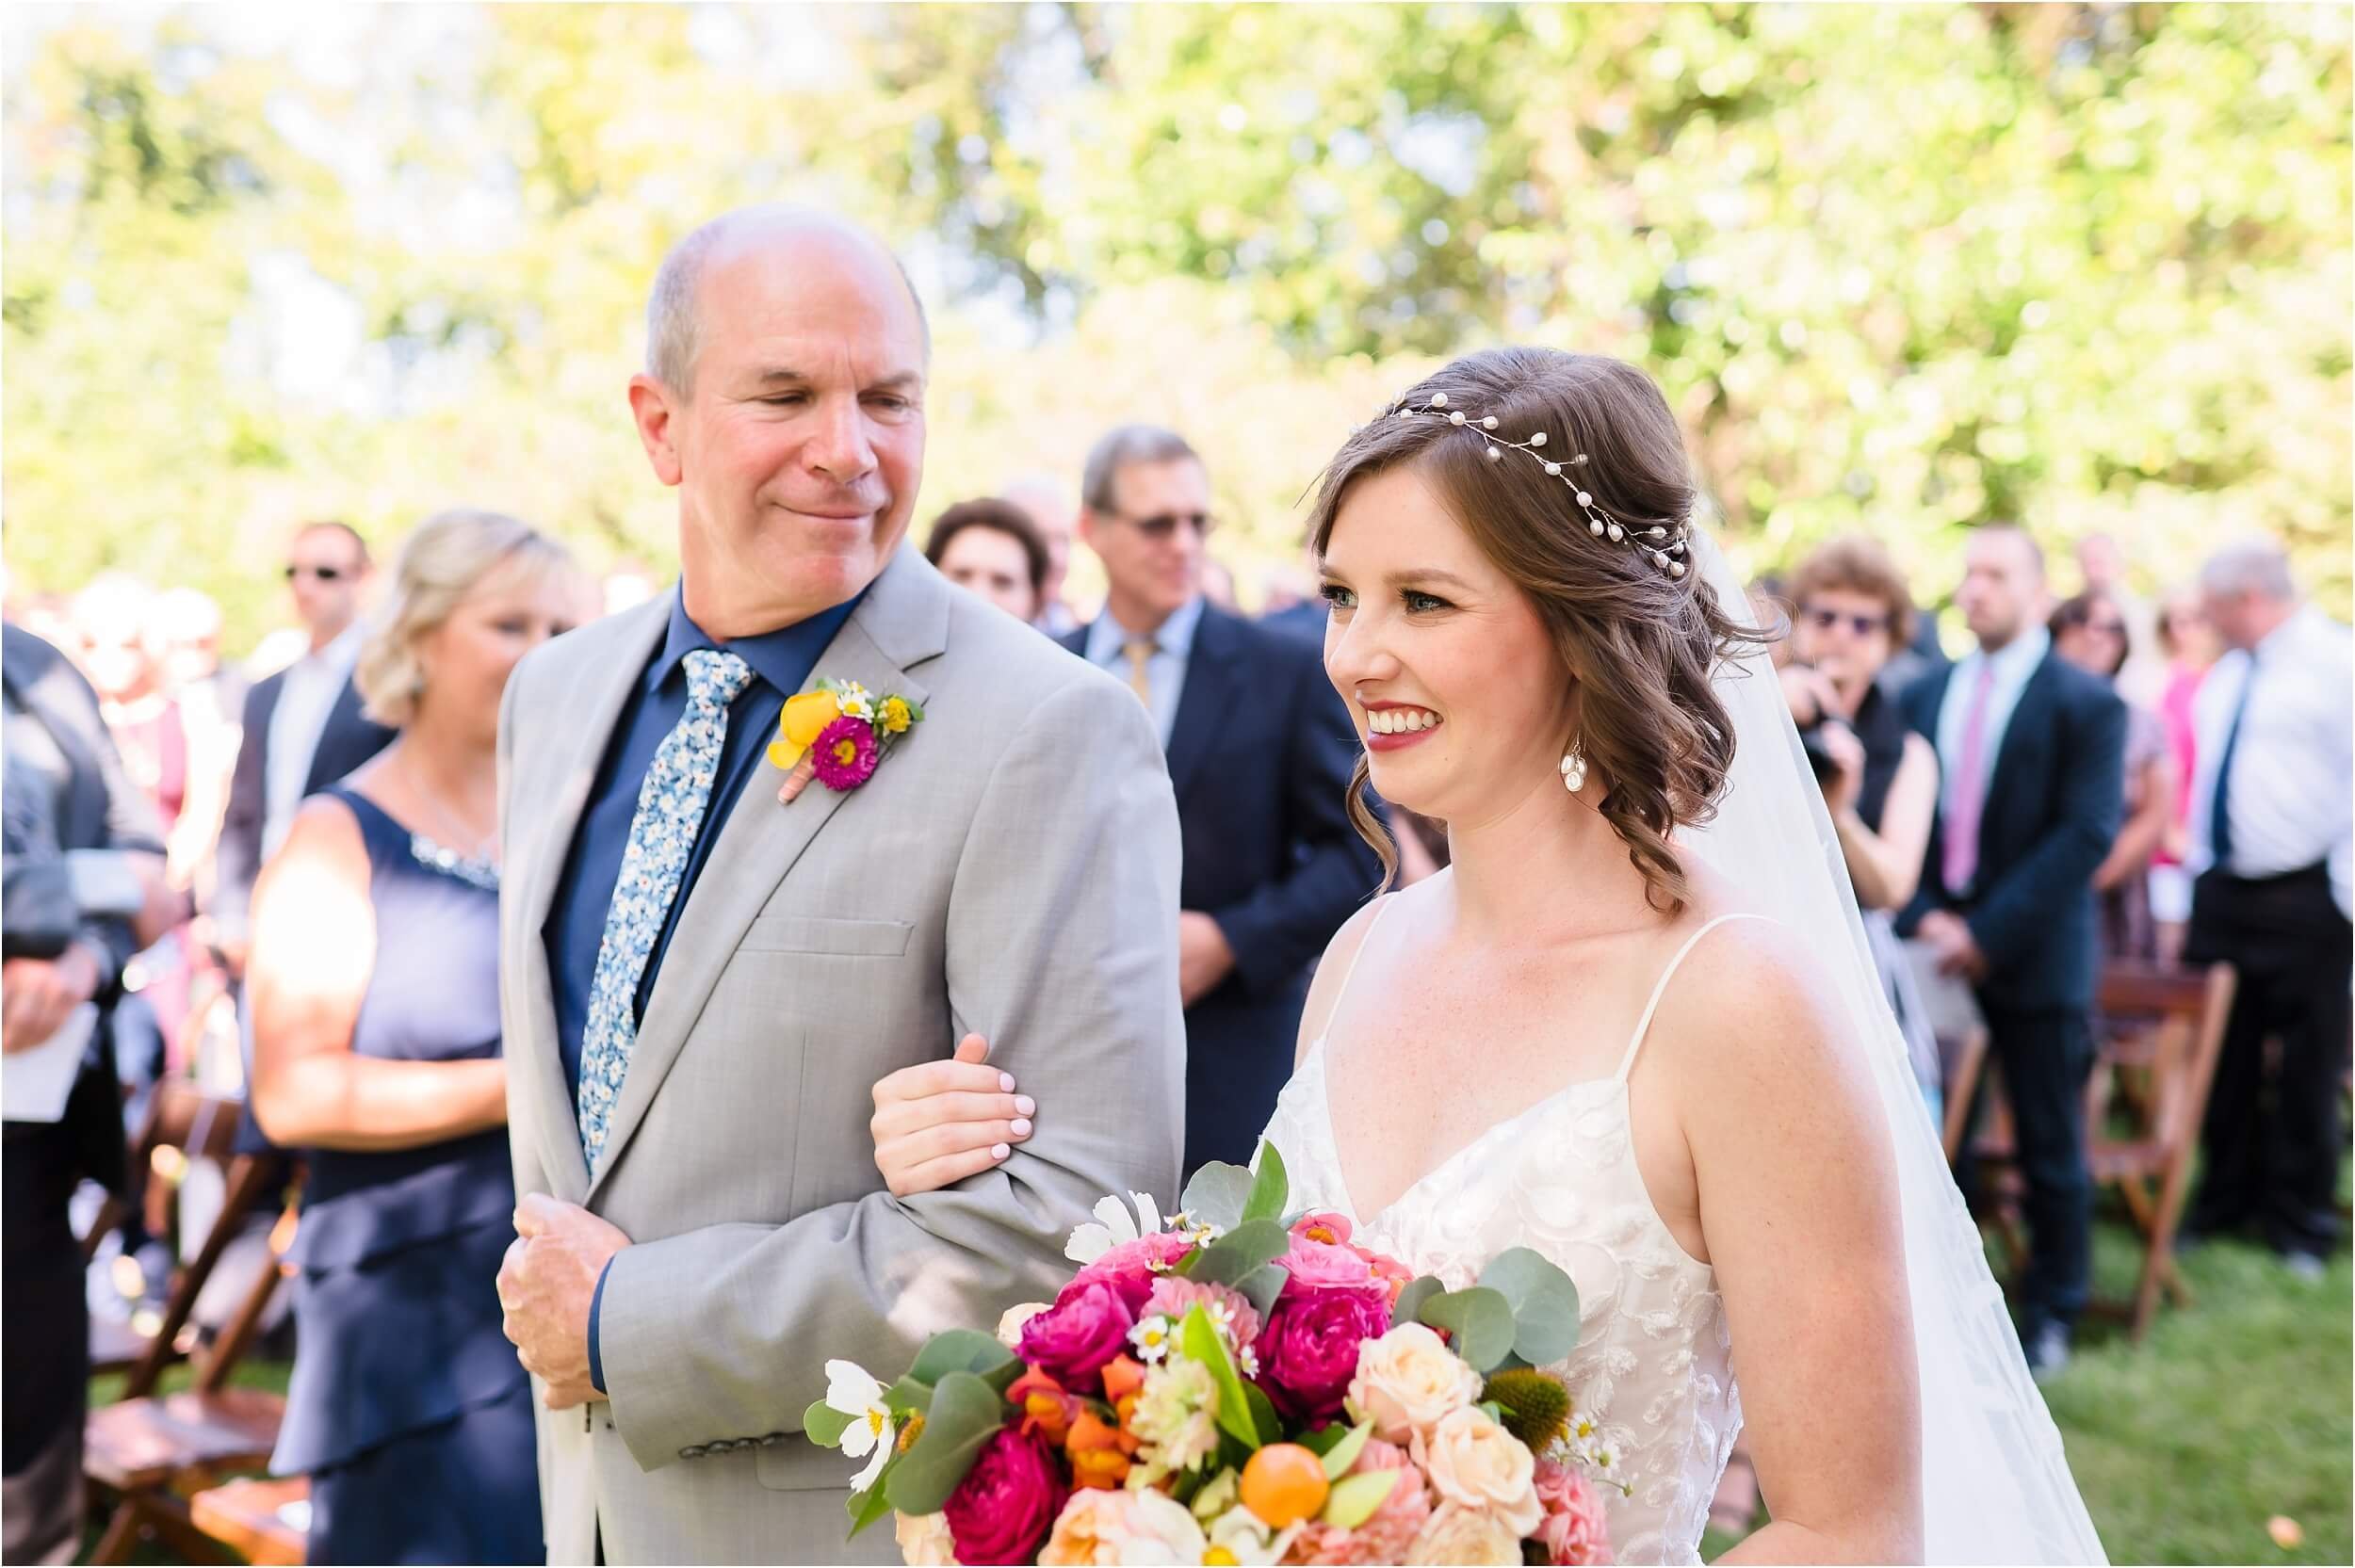  A dad looks lovingly at his daughter as they walk down the aisle towards her husband at their outdoor wedding ceremony.  